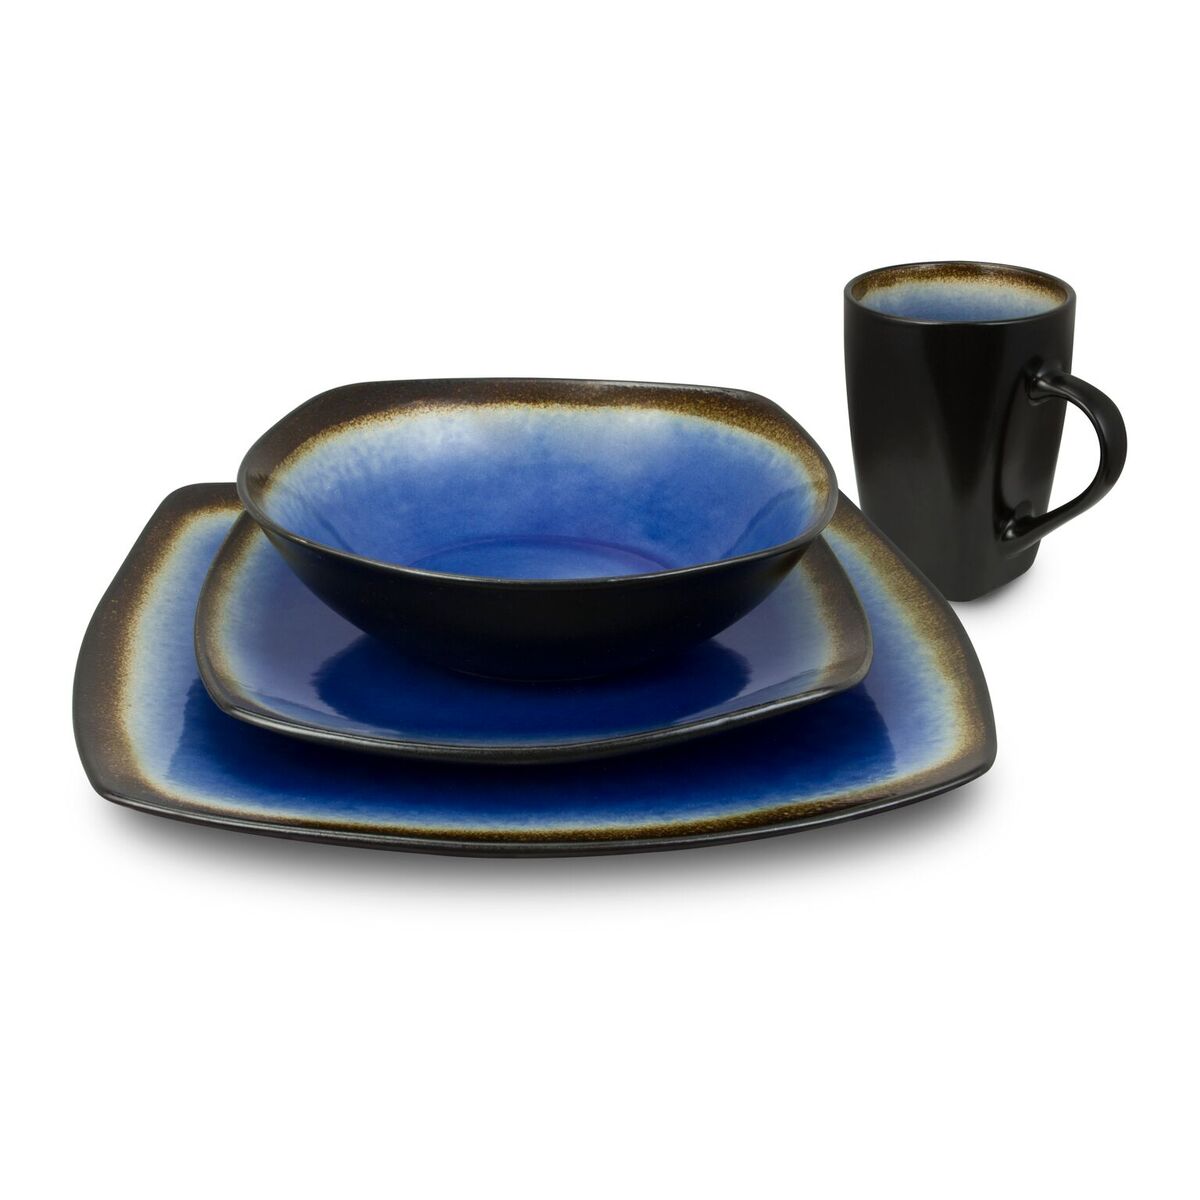 Haus By Crt 43703 Bl Haus 16 Piece Brown And Blue Dinnerware Set - Curved Edges